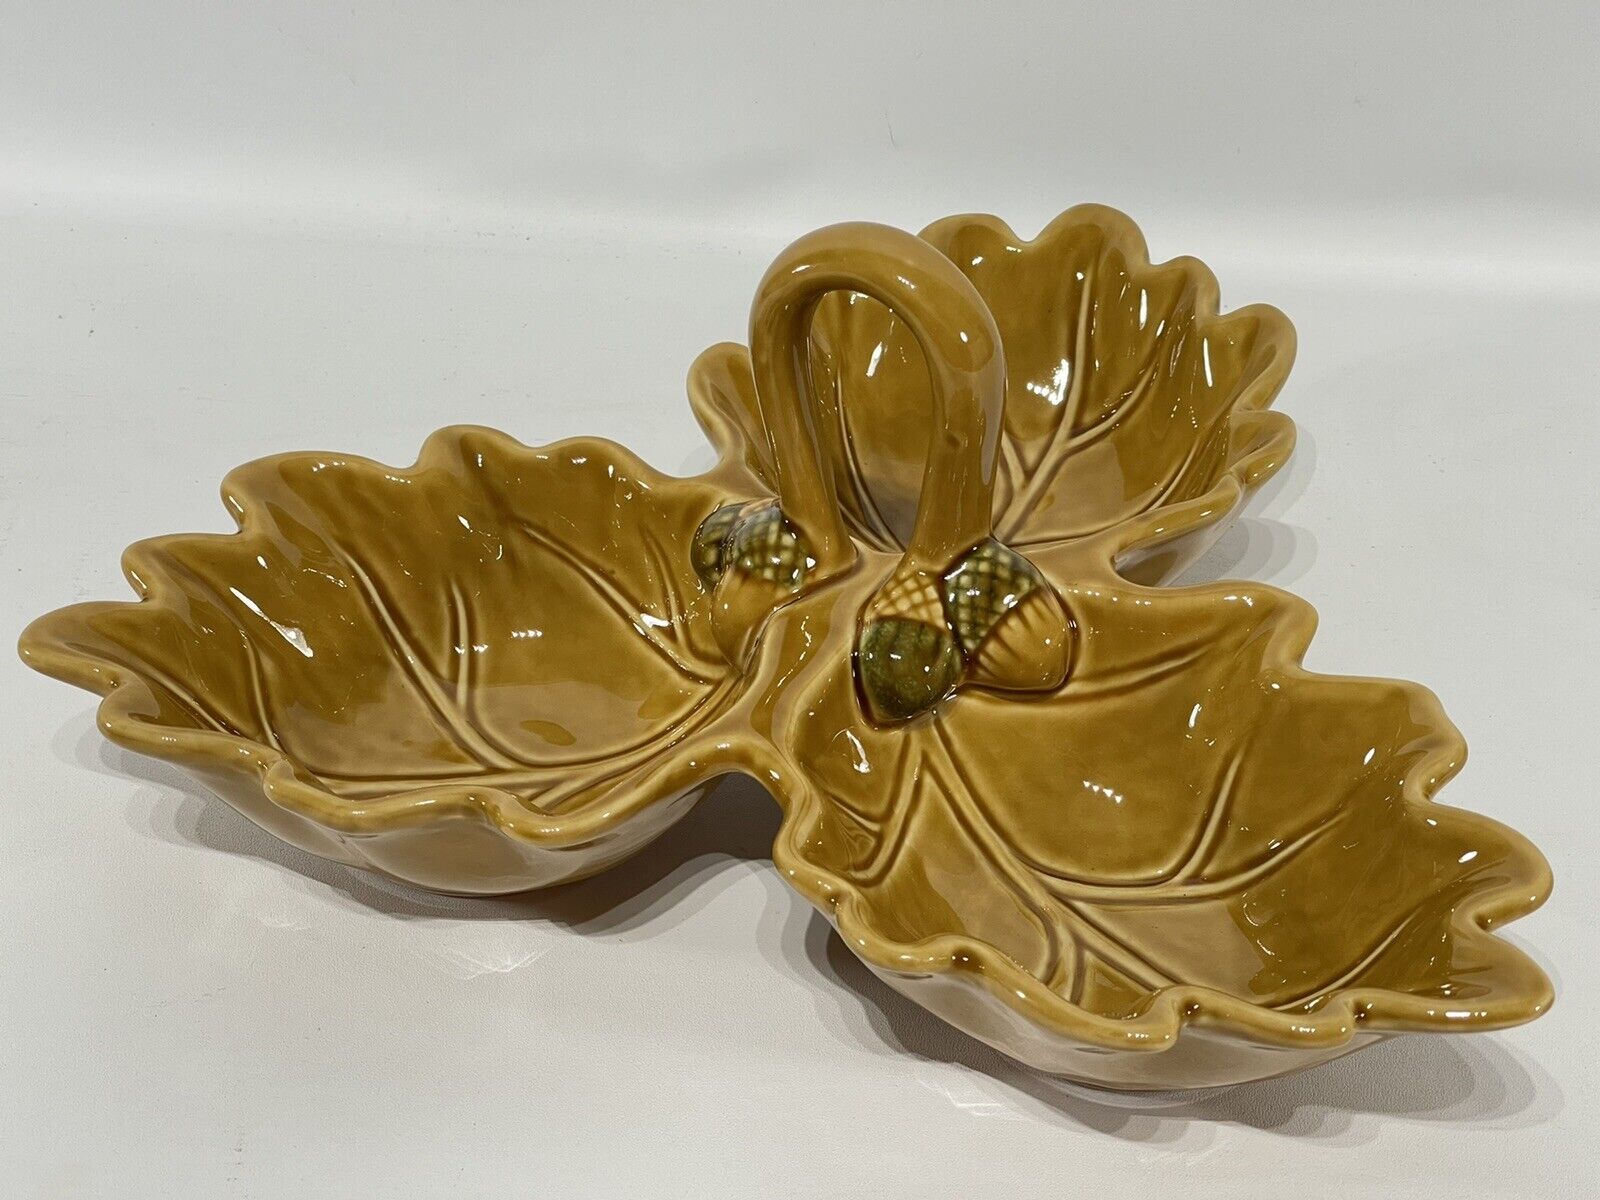 Roscher & Co Tidbit Tray Oak and Acorn Collection Stoneware Candy Olive Nut Dish